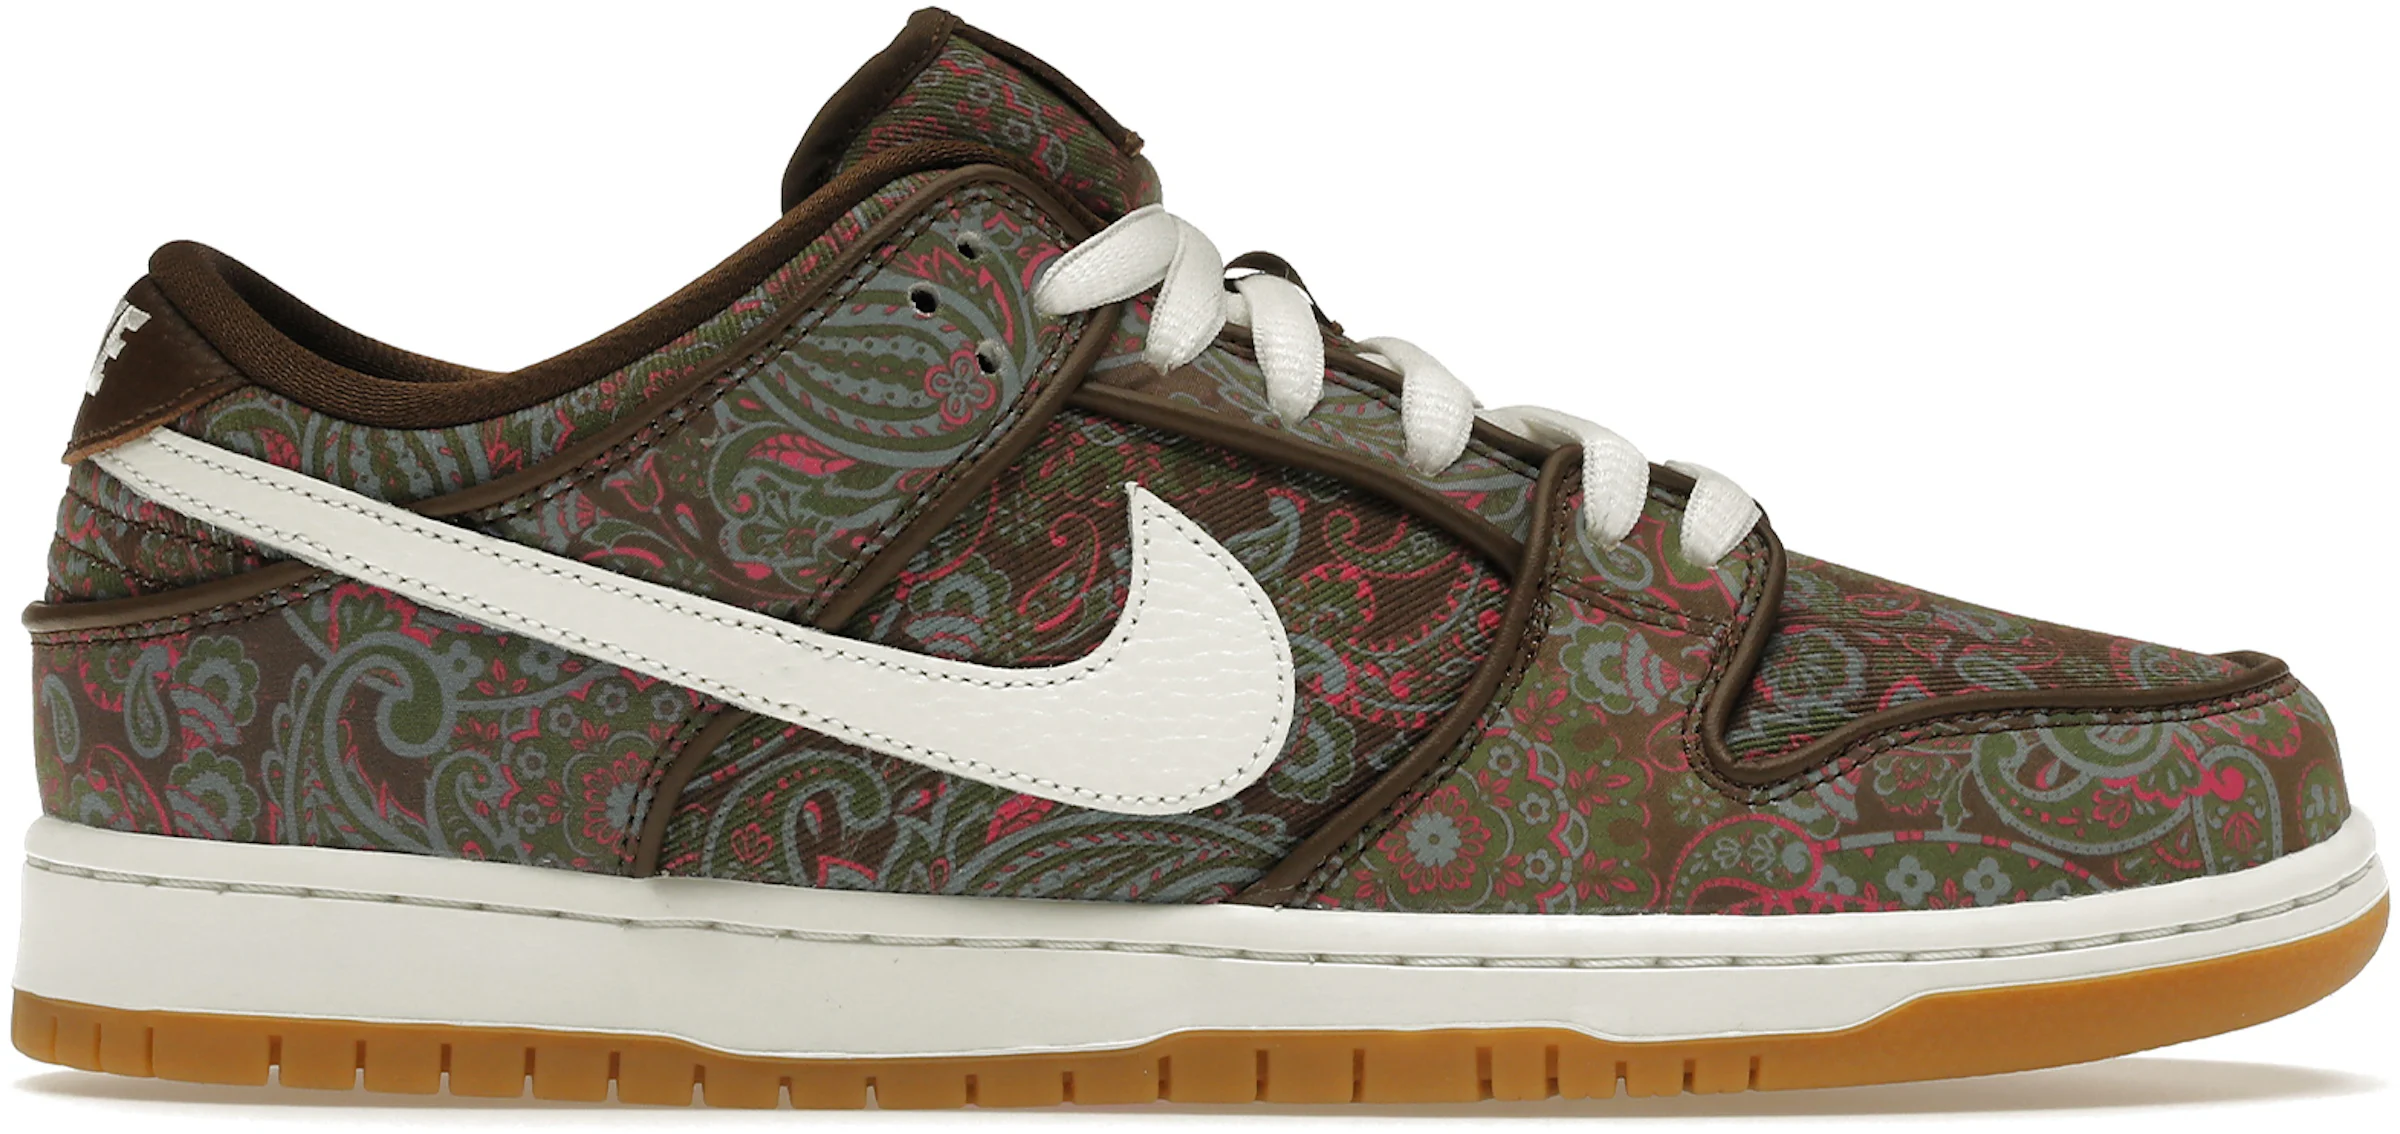 Nike.com on X: Created for the hardwood but taken to the streets. The  Women's Dunk Low 'Orange Paisley' Available at 10am ET    / X